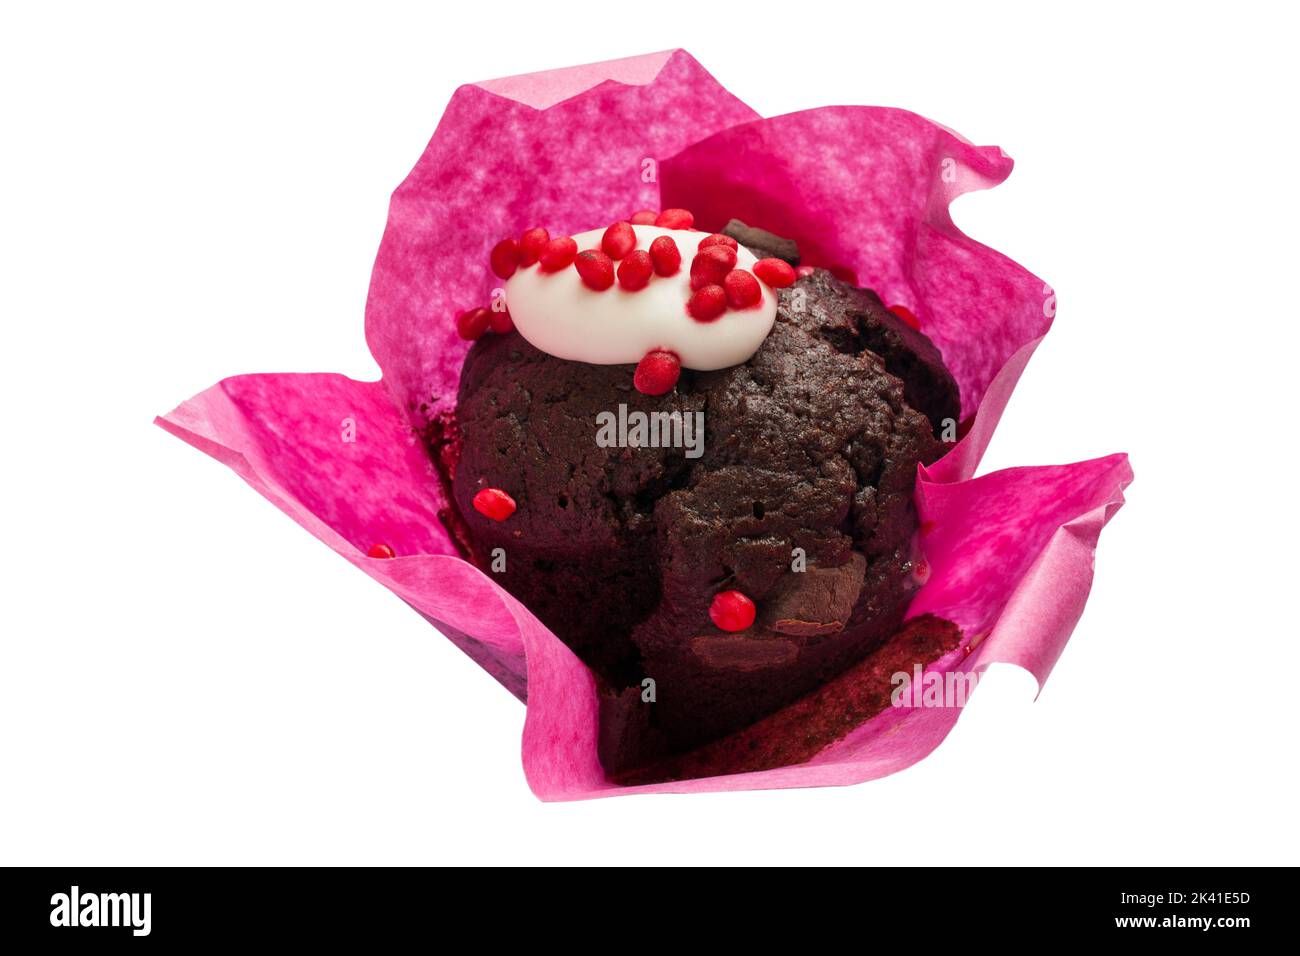 Black Forest Muffin by Sainsbury's from Sainsbury's in-store bakery isolated on white background Stock Photo